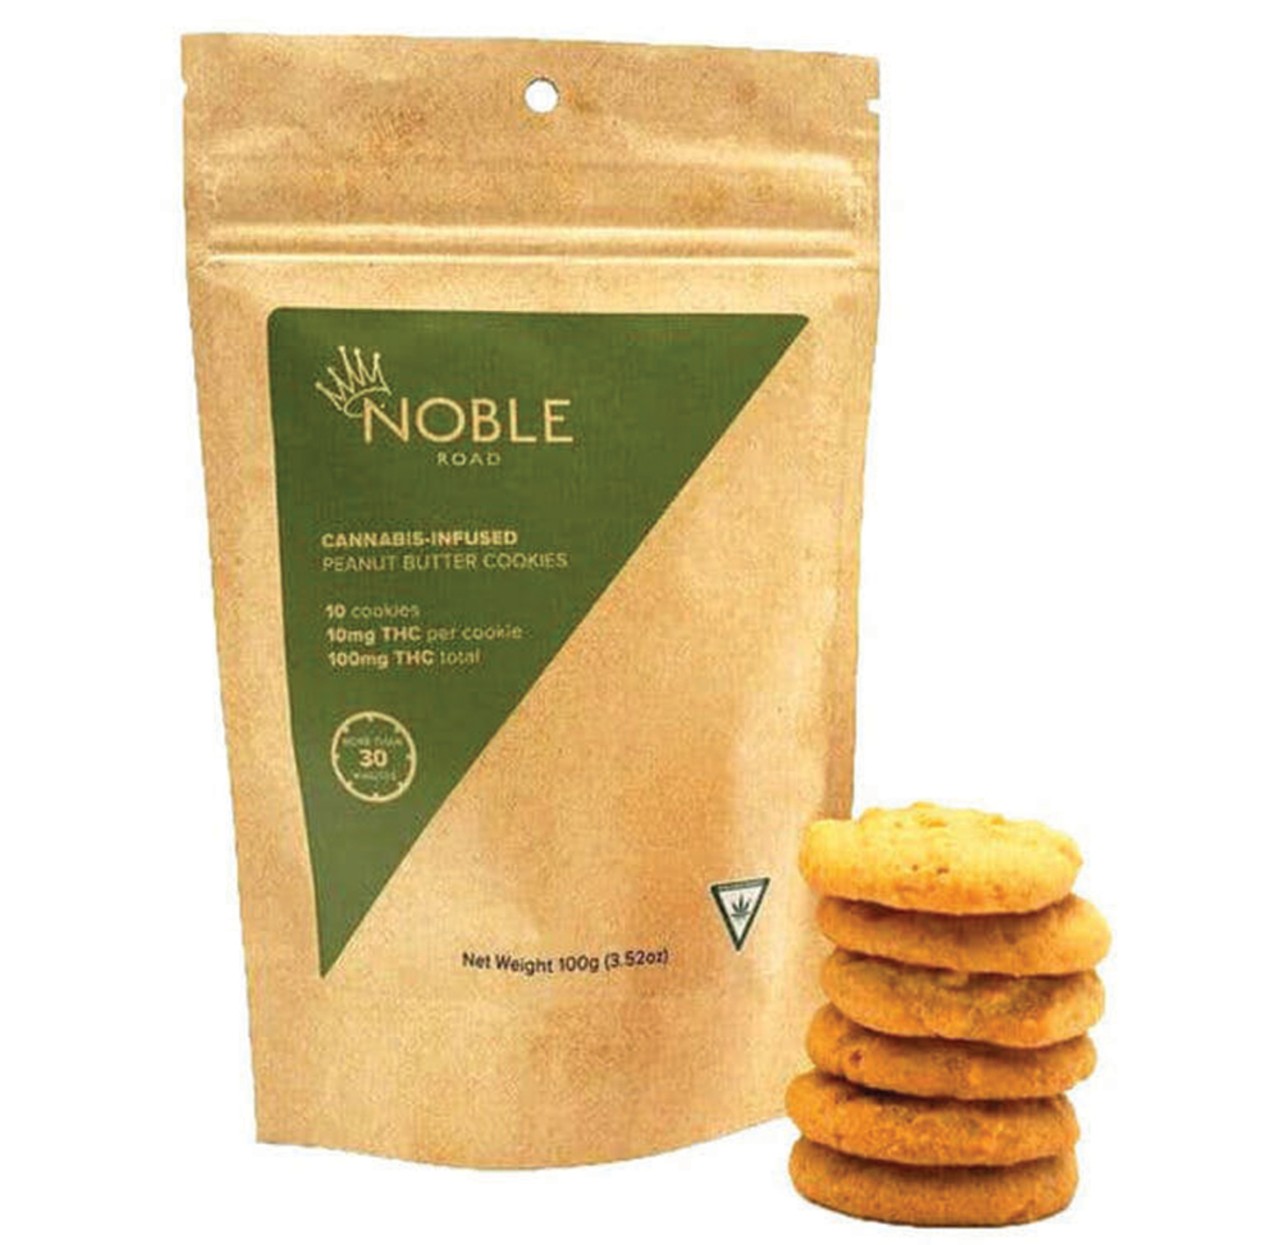 For those with a major sweet tooth&#133; but who know how to moderate
Noble Road Molasses, Peanut Butter or Chocolate Chip cookies, 10-pack, 100mg THC, $20
New Standard, 24906 John R Rd., Hazel Park; 248-873-0420; anewstandard.com
Noble Road, a Black-owned Lansing-based company, is not messing around, folks. Their selection of artisanal baked goods, which are made by simmering sweet-cream butter with flower to create their proprietary cannabutter, come in delectable flavors that &#151; you guessed it &#151; will get you high AF. Each pack comes with 10 cookies, and each cookie contains 10mg of THC. That&#146;s 100mg of tasty THC goodness that should ABSOLUTELY be kept far, far away from little ones because, even if you&#146;re an adult who understands moderation (well, almost), these discs of delight are irresistable. If you want the buzz without the calories, Noble Road also offers vape cartridges.